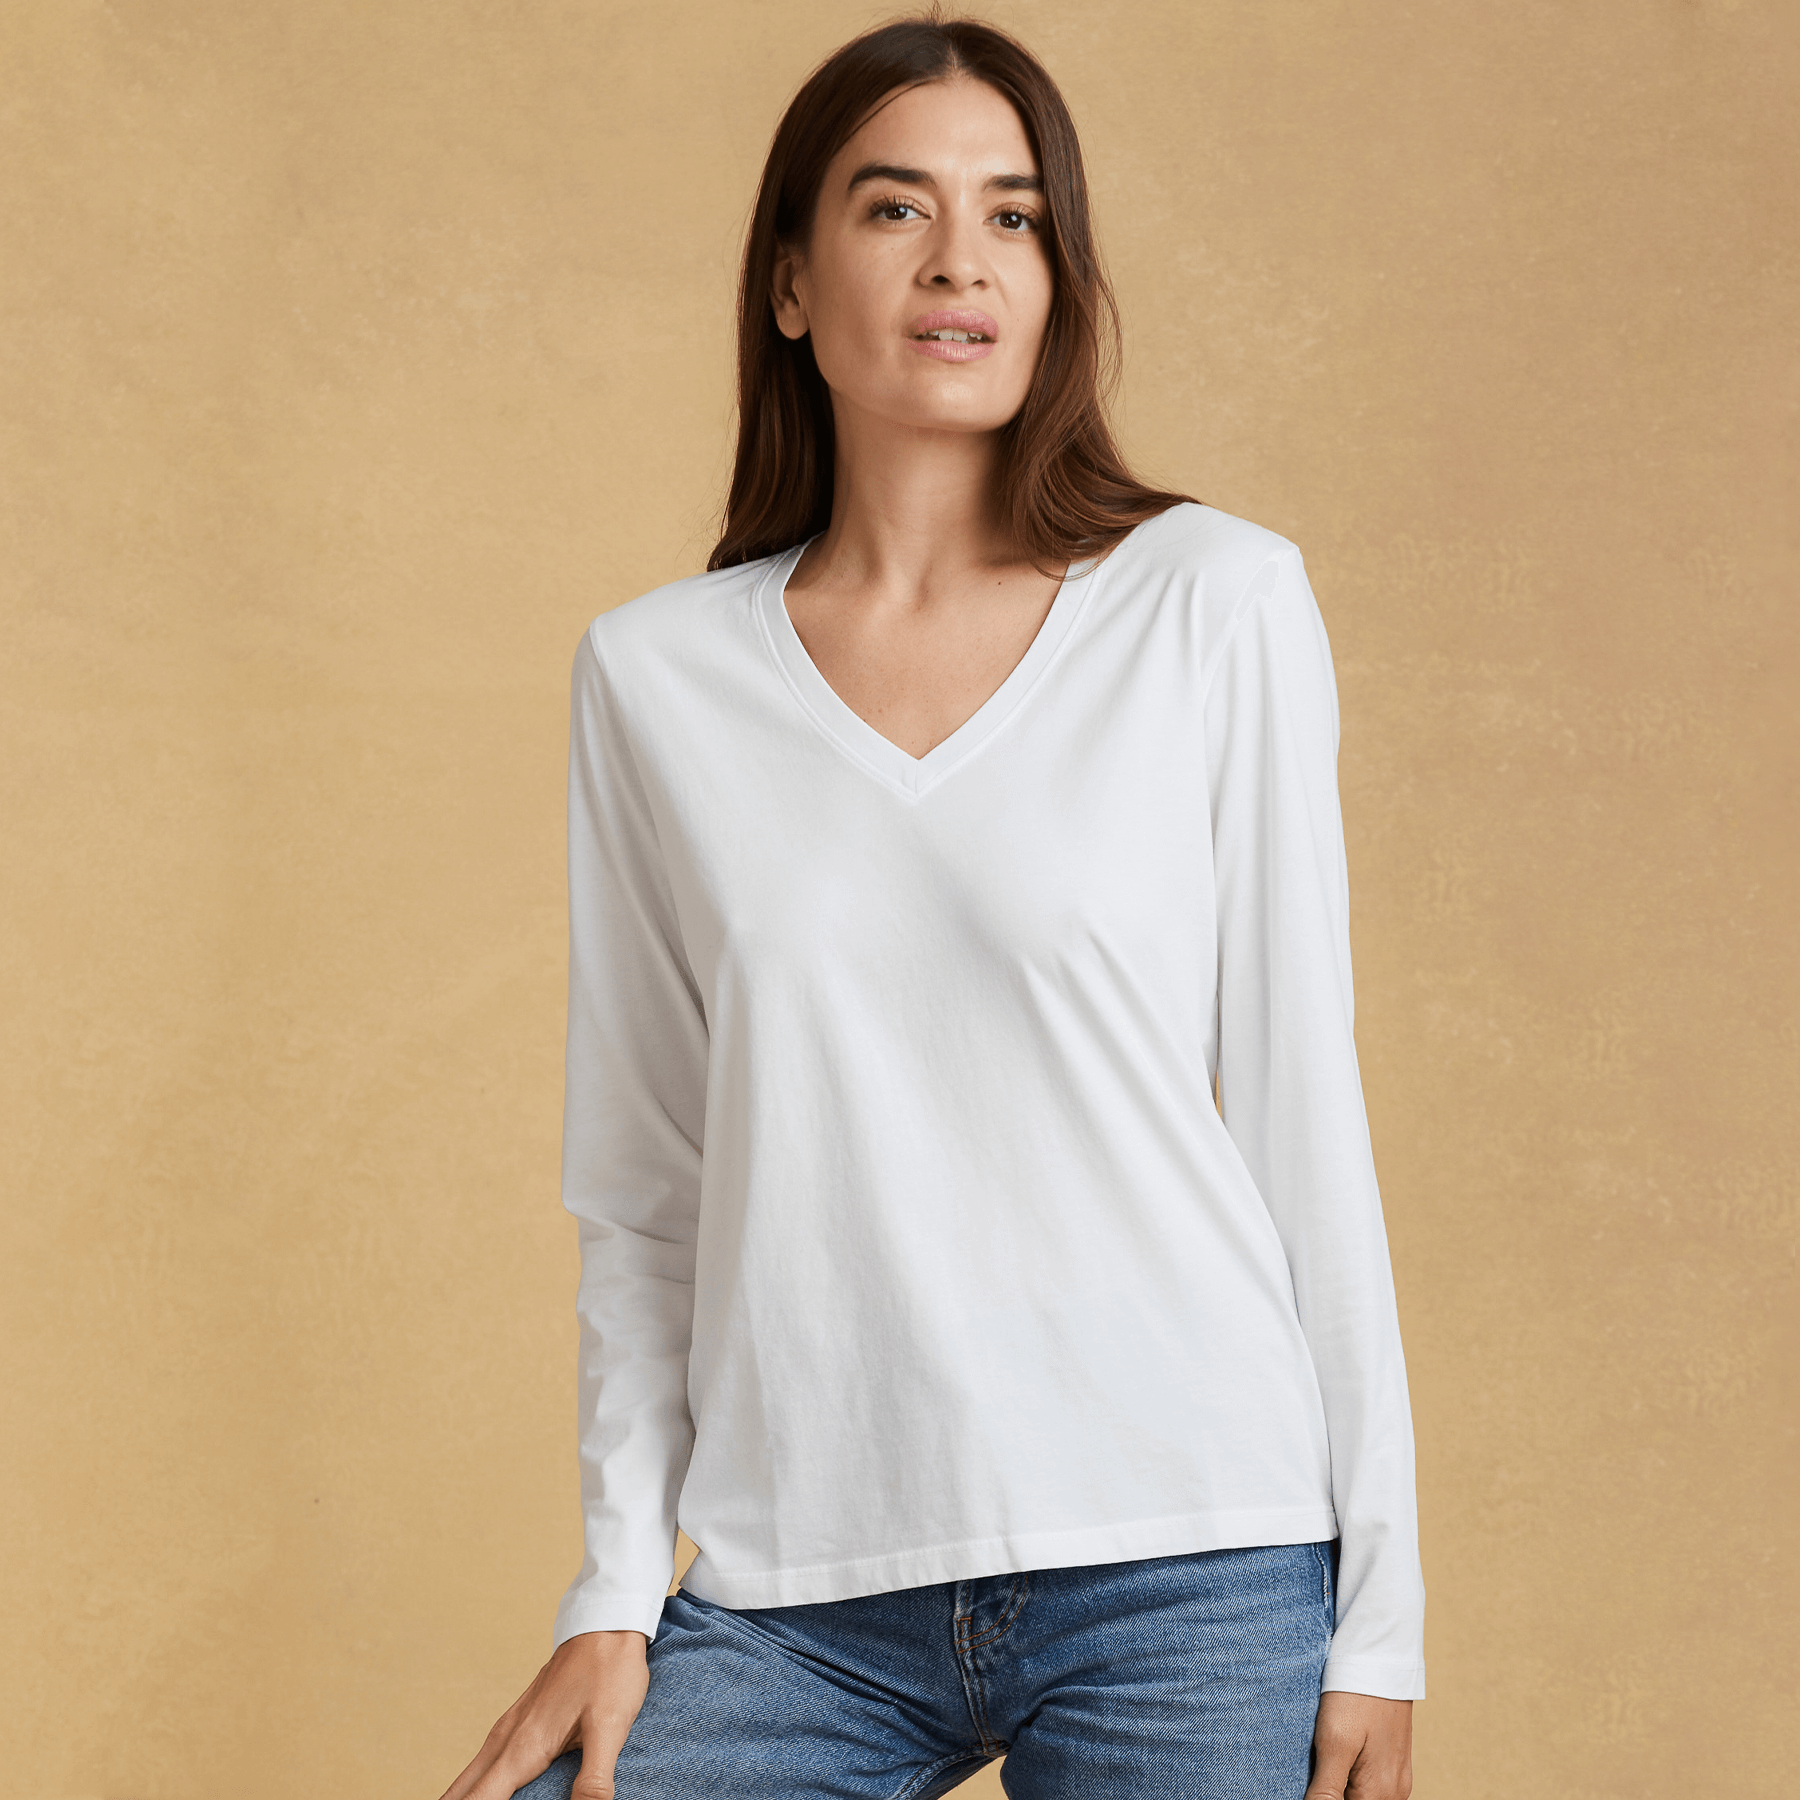 THE BLAZZE 1099 Women's Cotton Basic Sexy Solid V Neck Slim Fit